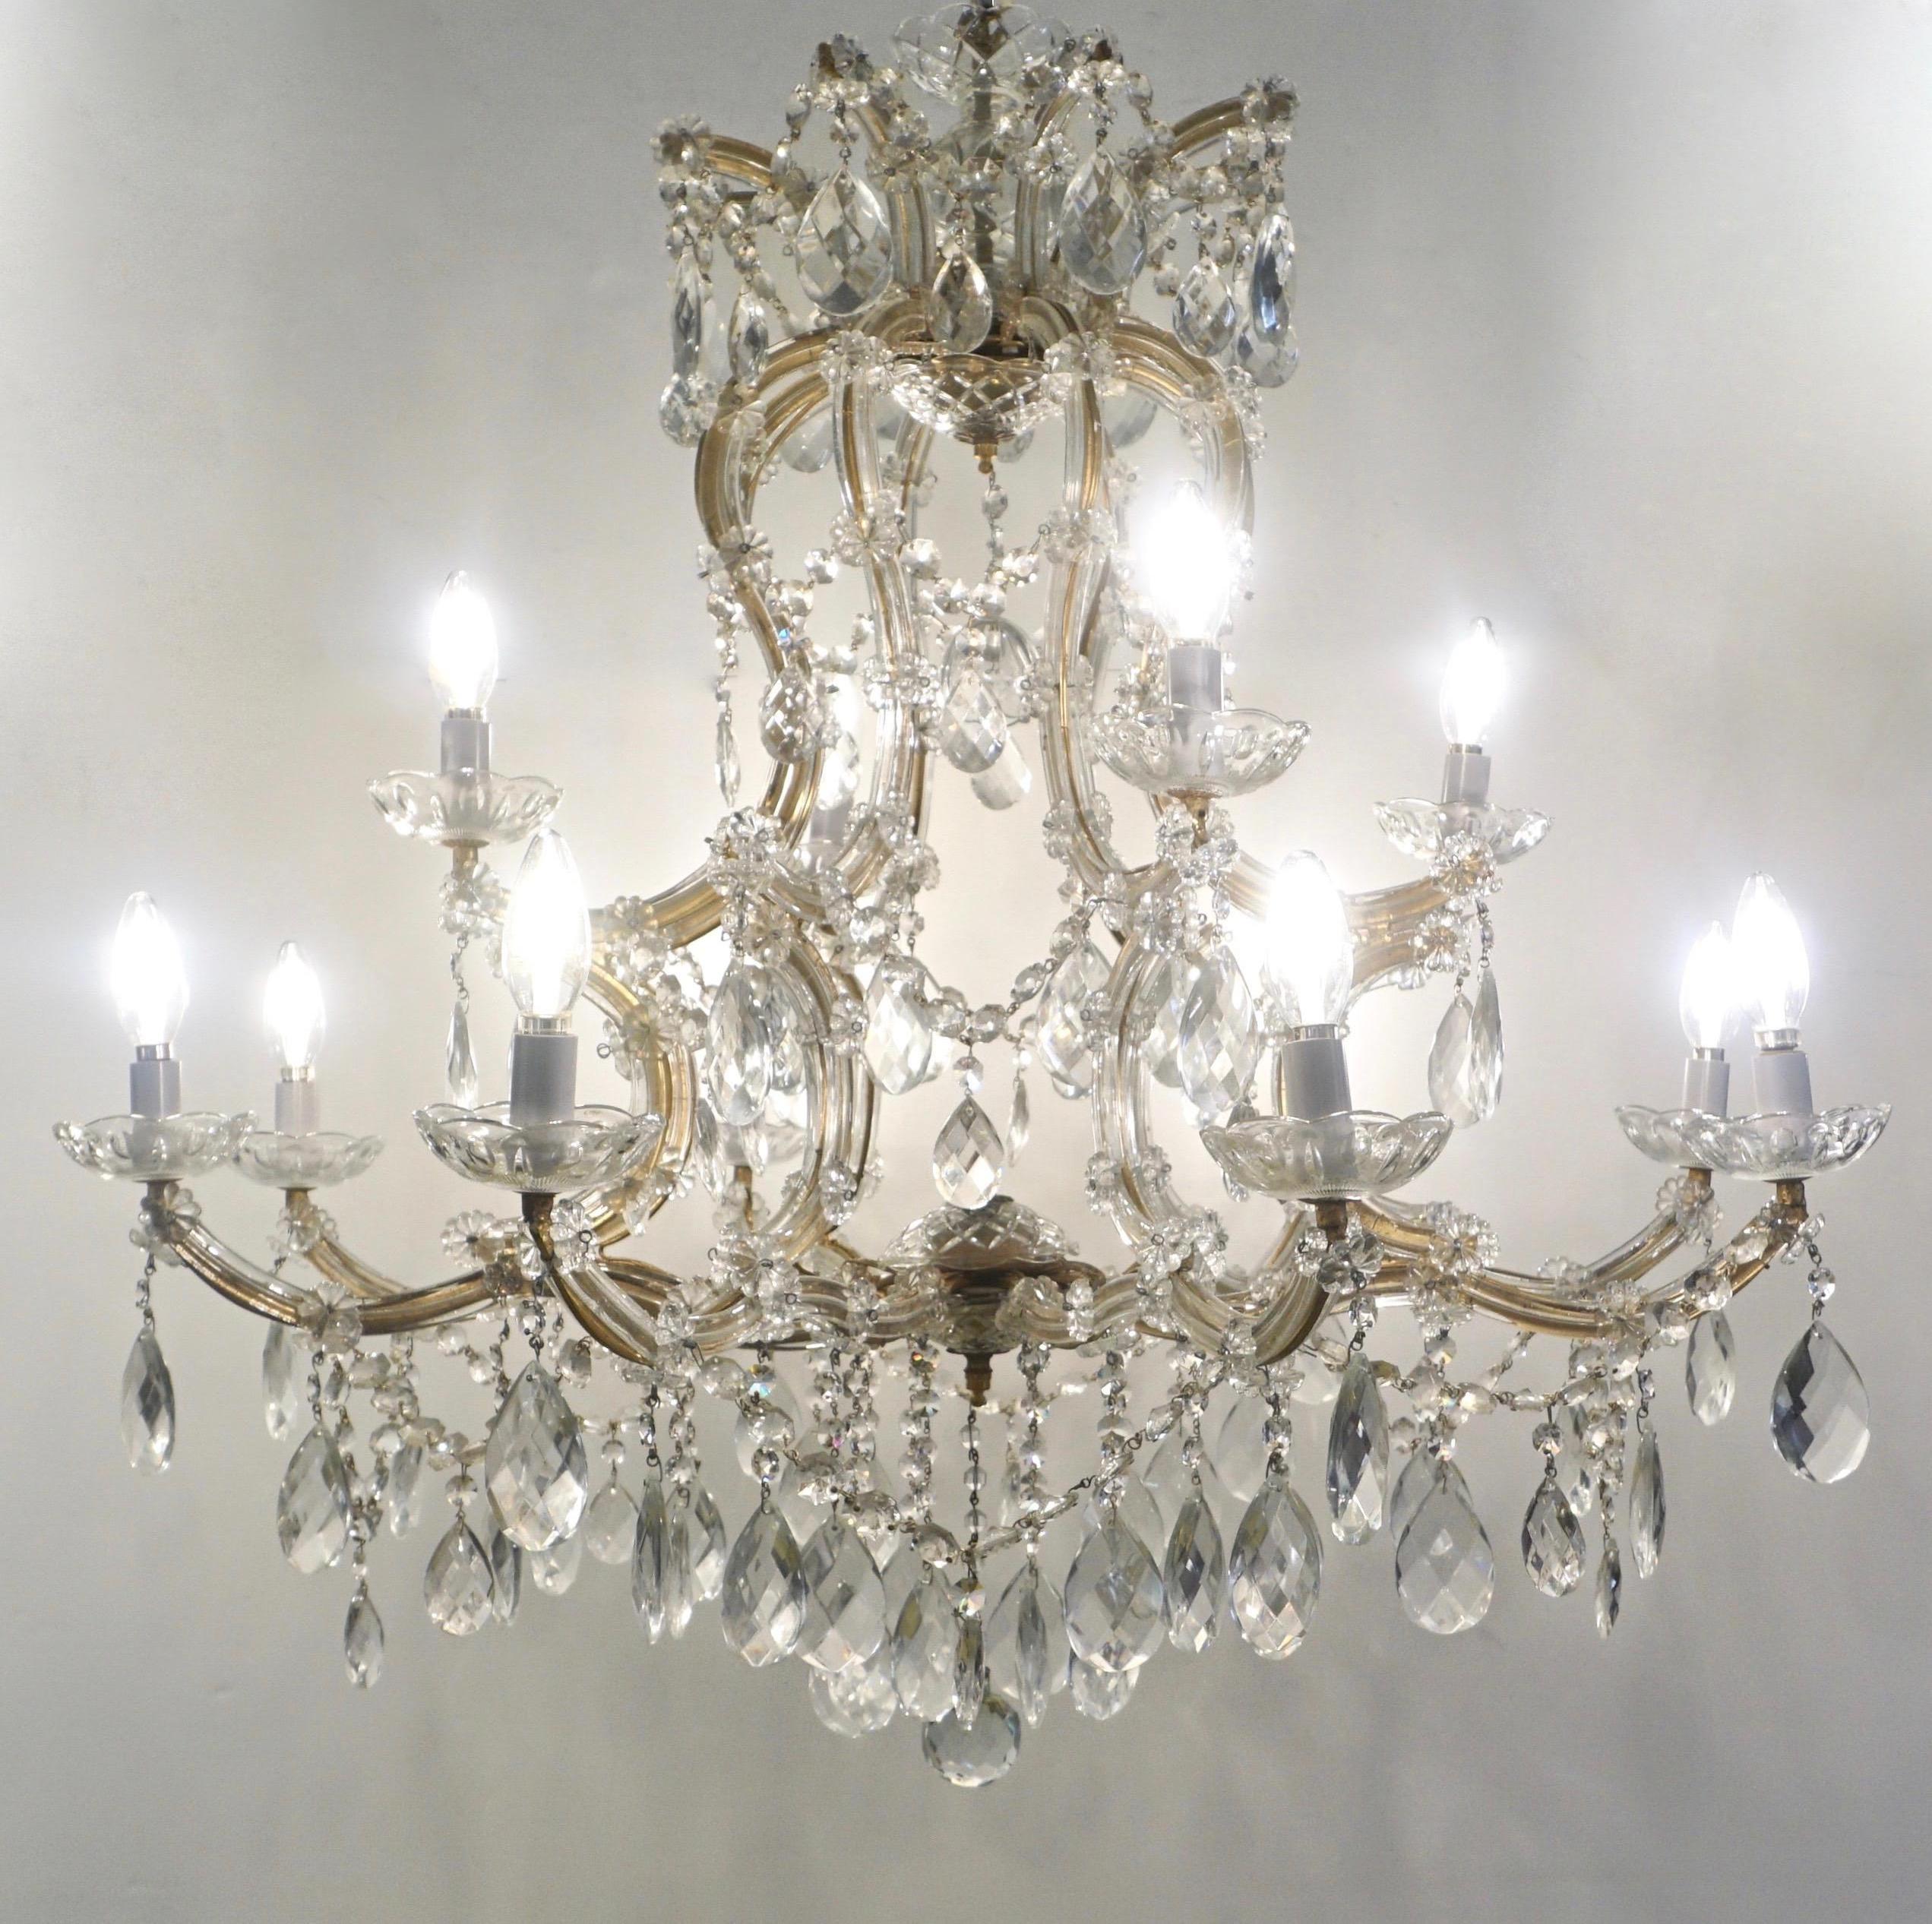 Maria Teresa original chandelier, antique piece entirely handcrafted in Italy late 1930s-early 1940s, with 12 lights, 4 on the upper tier, 8 at the bottom tier, extensively decorated with swags of crystal diamond cut drops and flowers, each arm